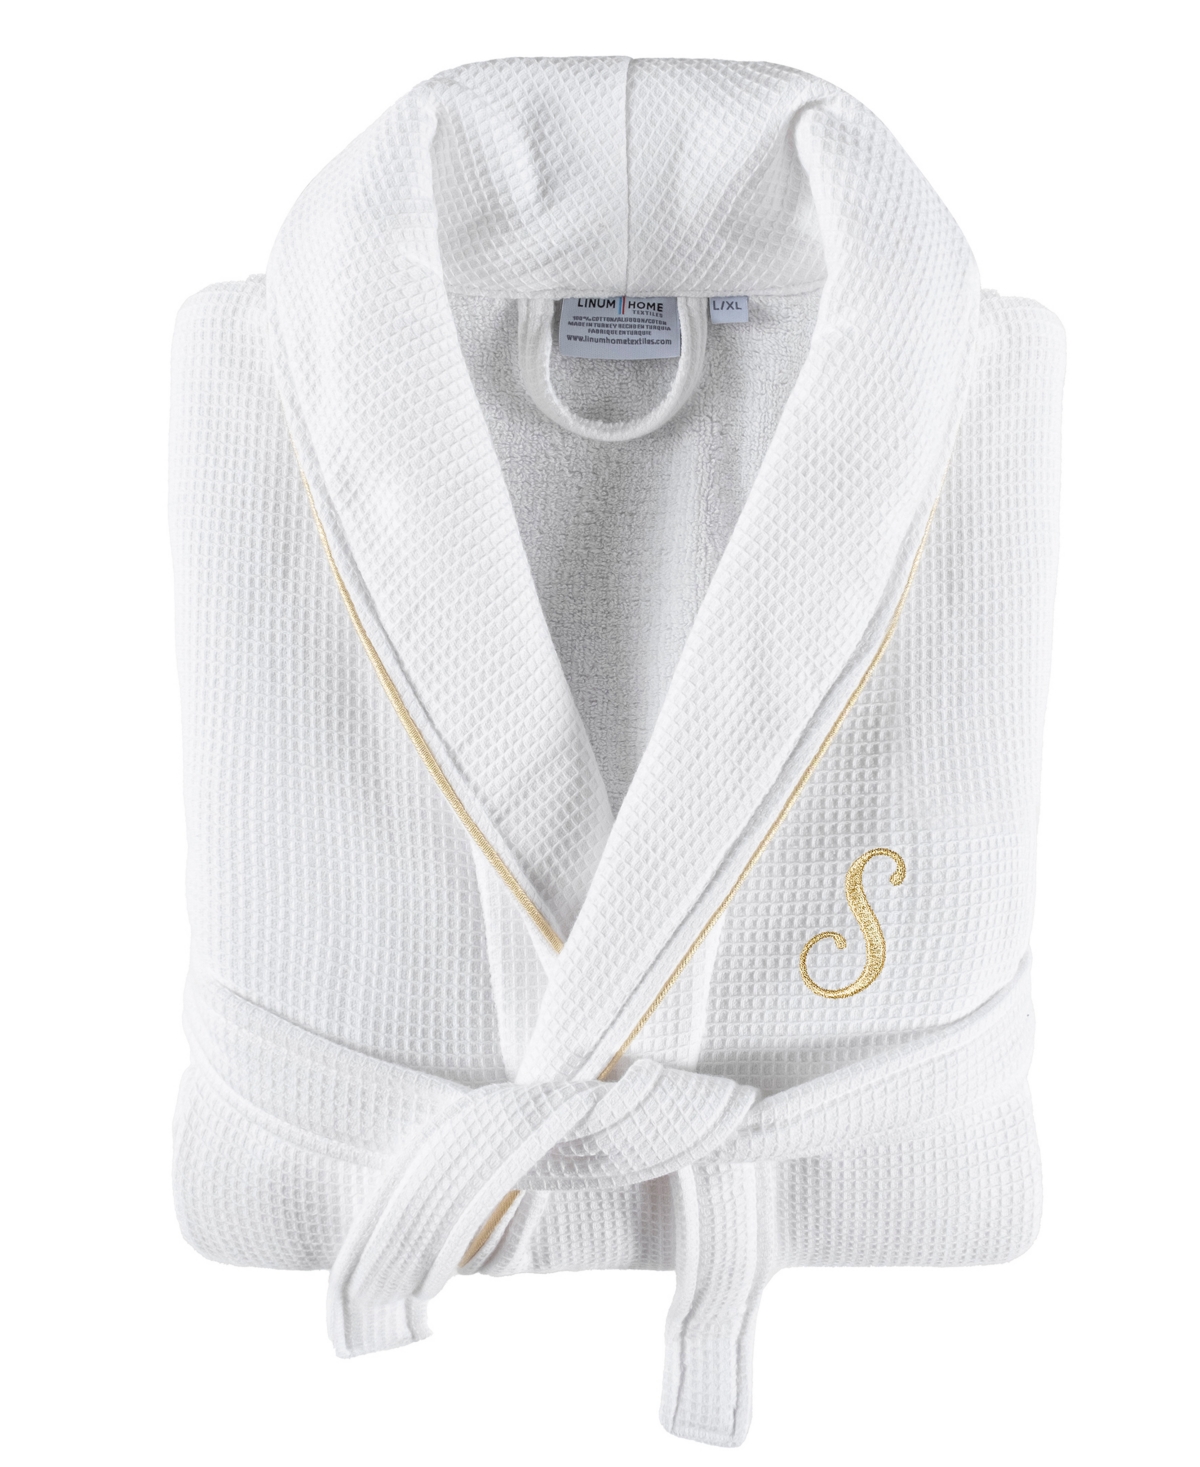 Linum Home Textiles 100% Turkish Cotton Unisex Personalized Waffle Weave Terry Bathrobe With Satin Piped Trim In White S